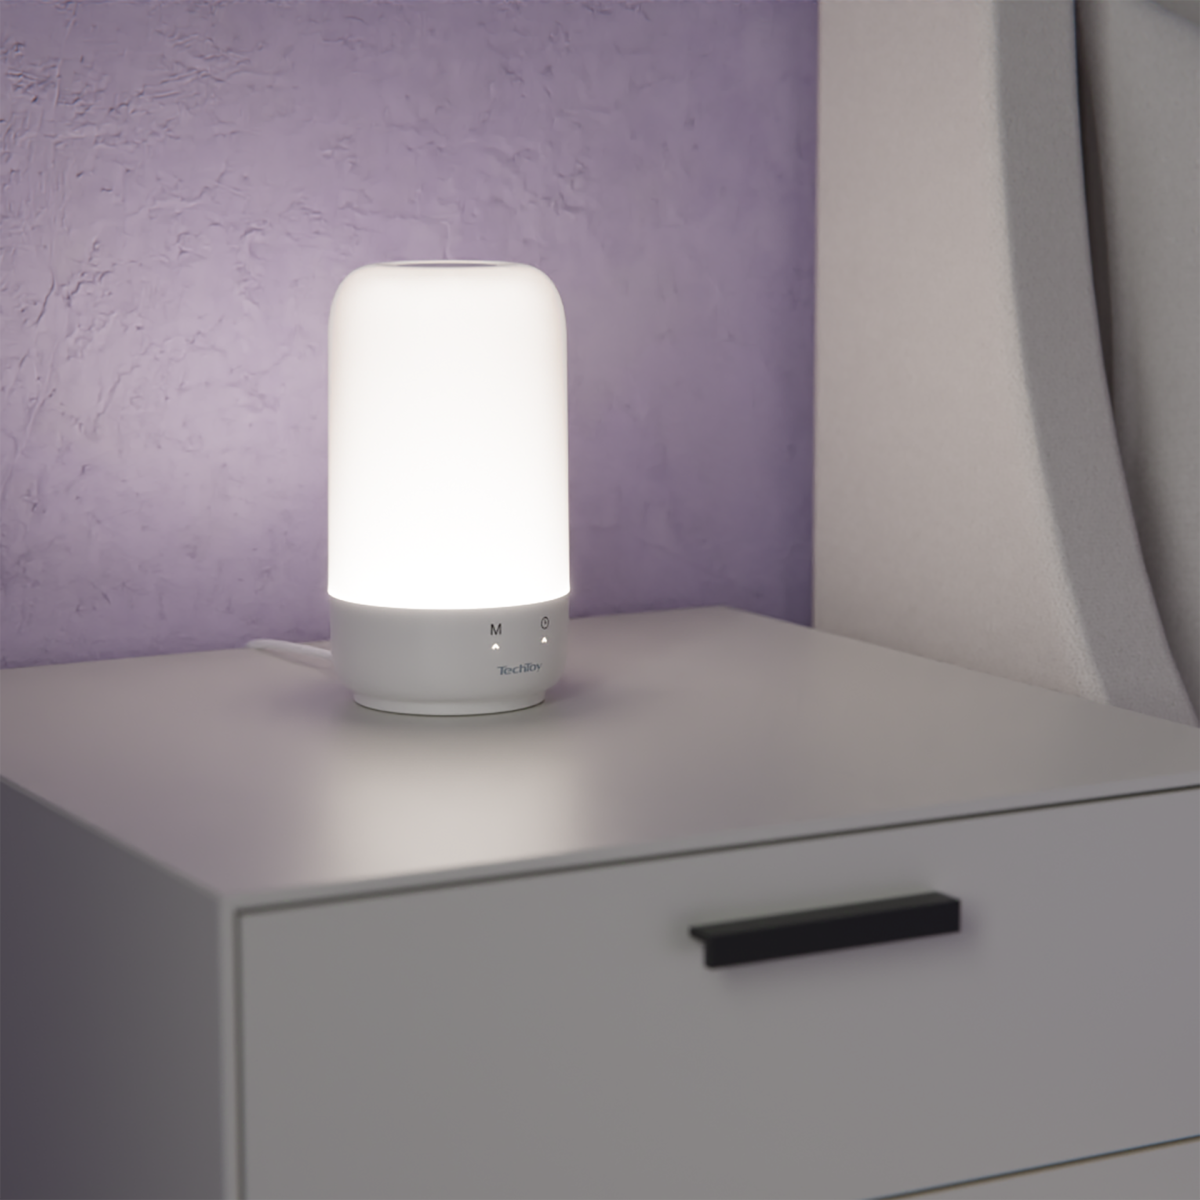 Techtoy Smart Table Lamp-1920x1920-01